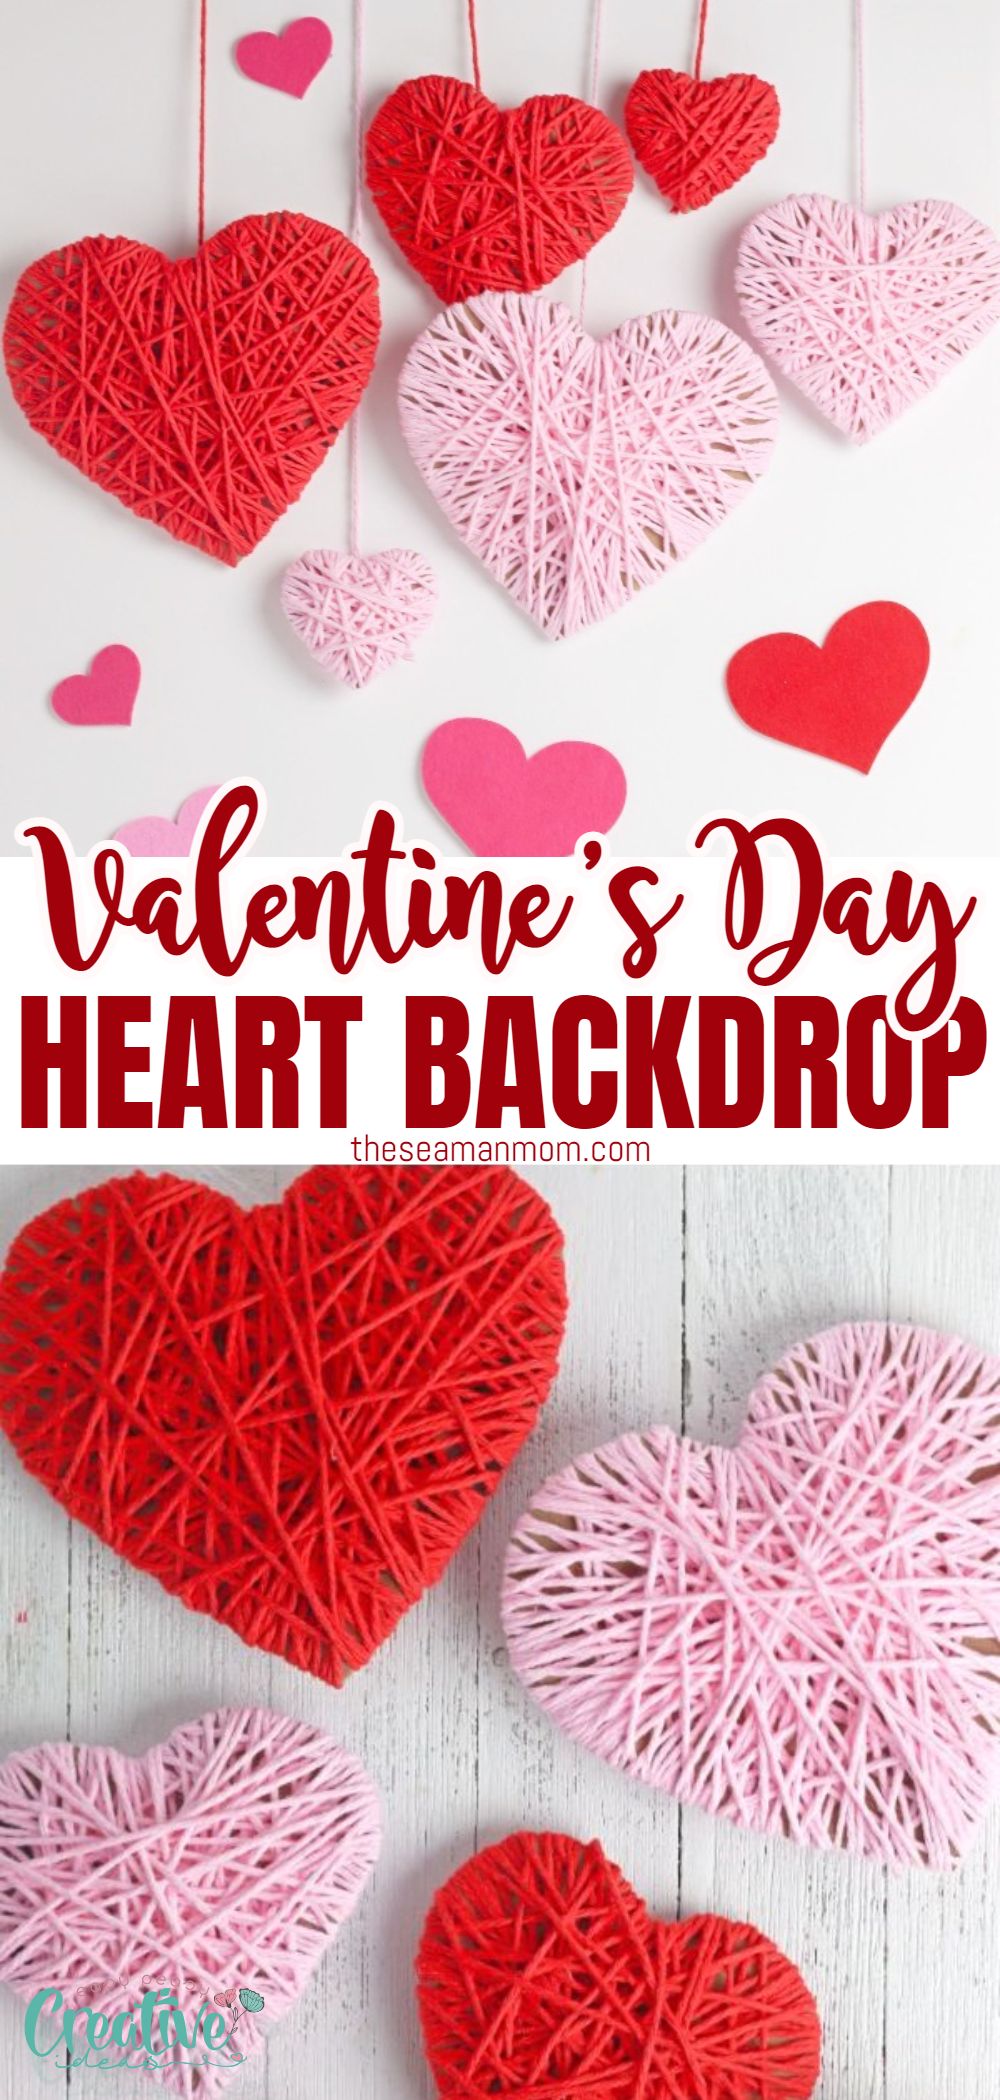 Want to impress your loved ones in the photos you take on Valentine's Day? Turn your home into a romantic date setting by following this step by step tutorial for making your own adorable Valentines backdrop! via @petroneagu